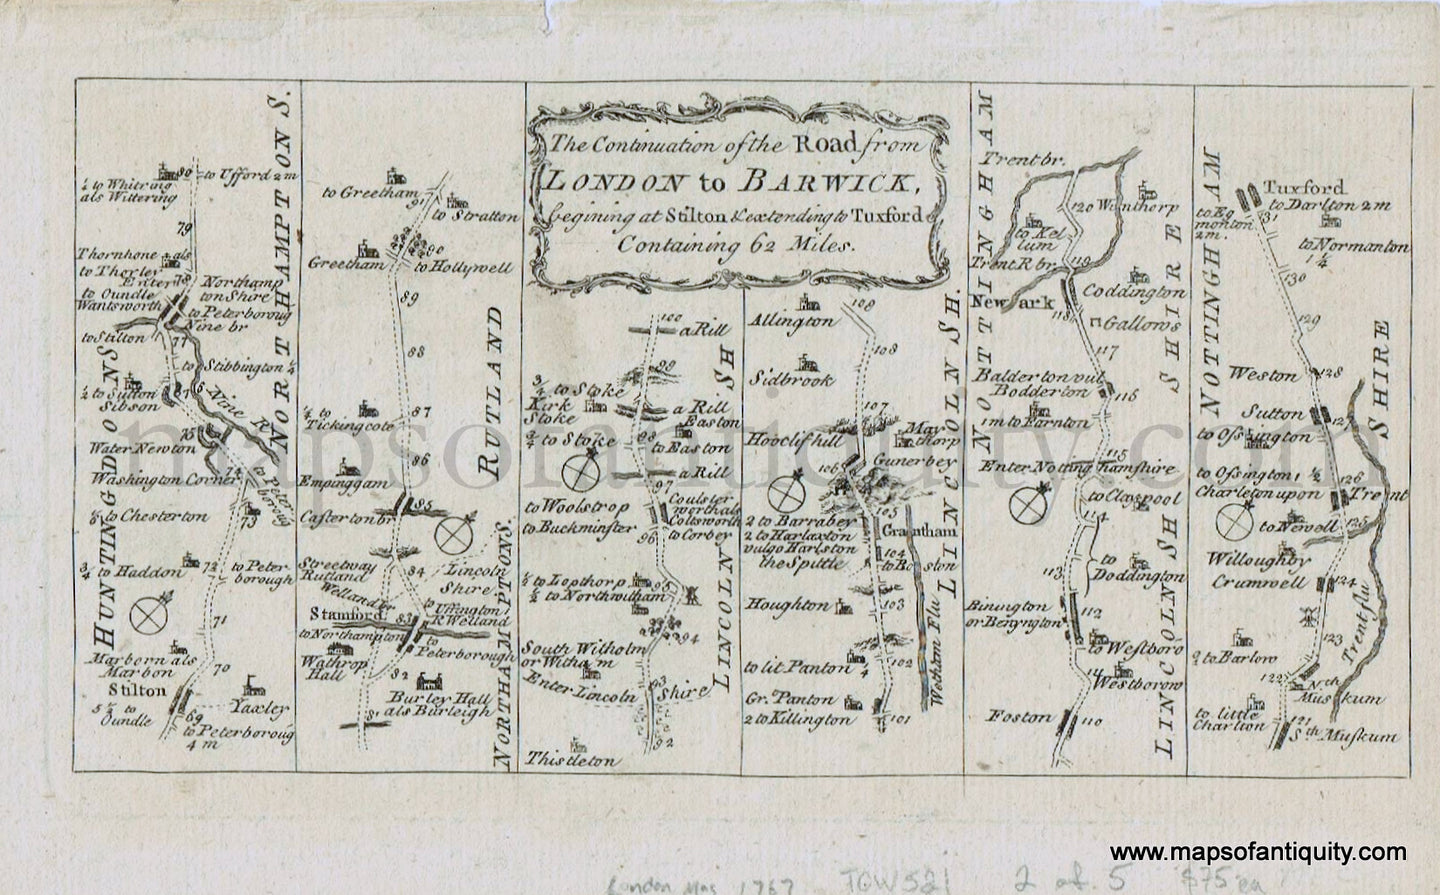 Antique-Black-and-White-Map-Part-of-The-Road-from-London-to-Barwick-beginning-at-Stilton-&-Extending-to-Tuxford-Containing-62-miles.-c.-1767-London-Magazine-England-1700s-18th-century-Maps-of-Antiquity